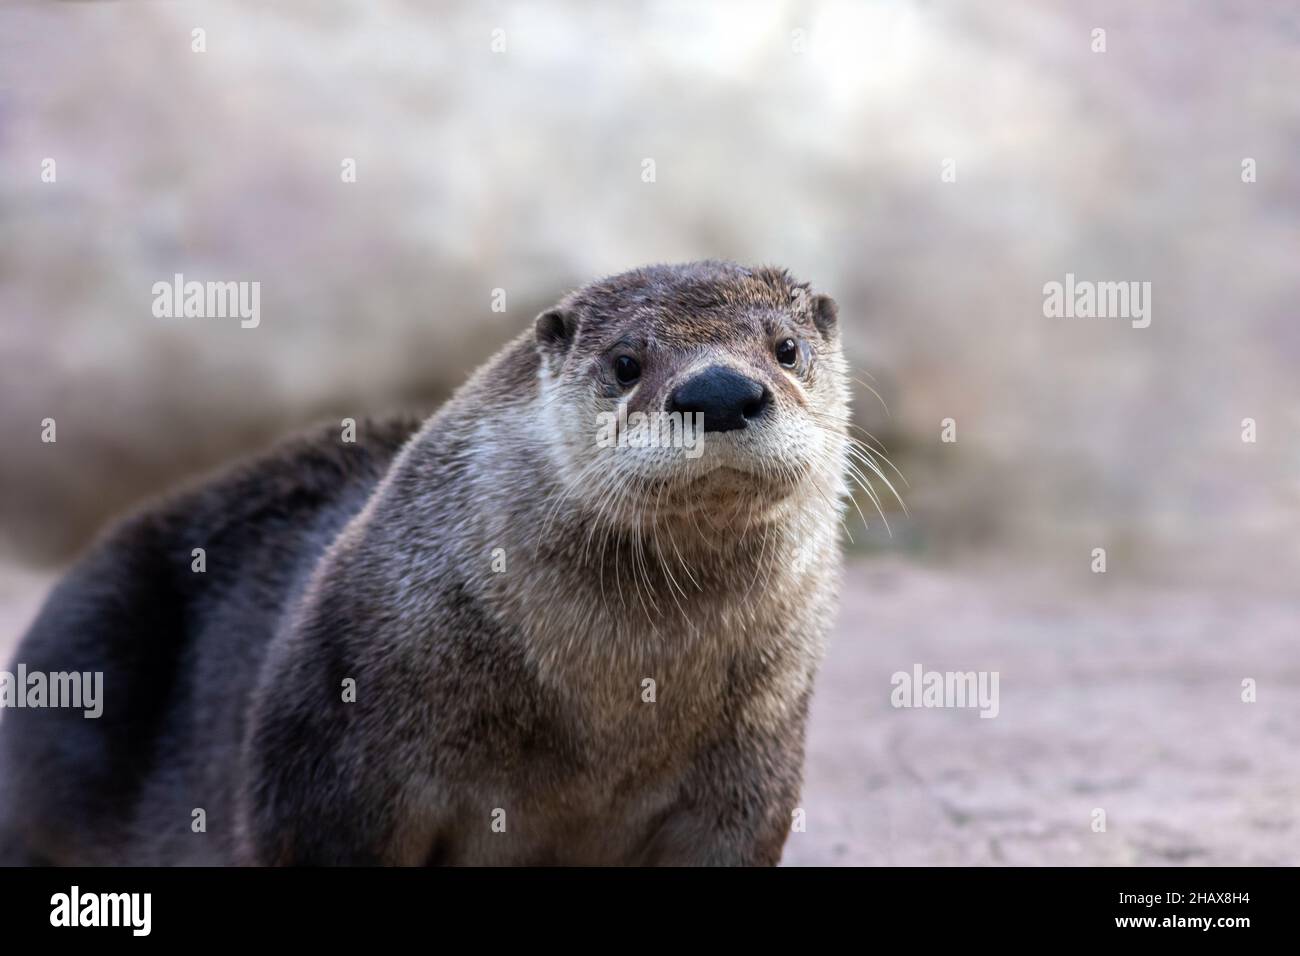 North American River Otter (Lontra canadensis) portrait with soft defocused background and copy space Stock Photo